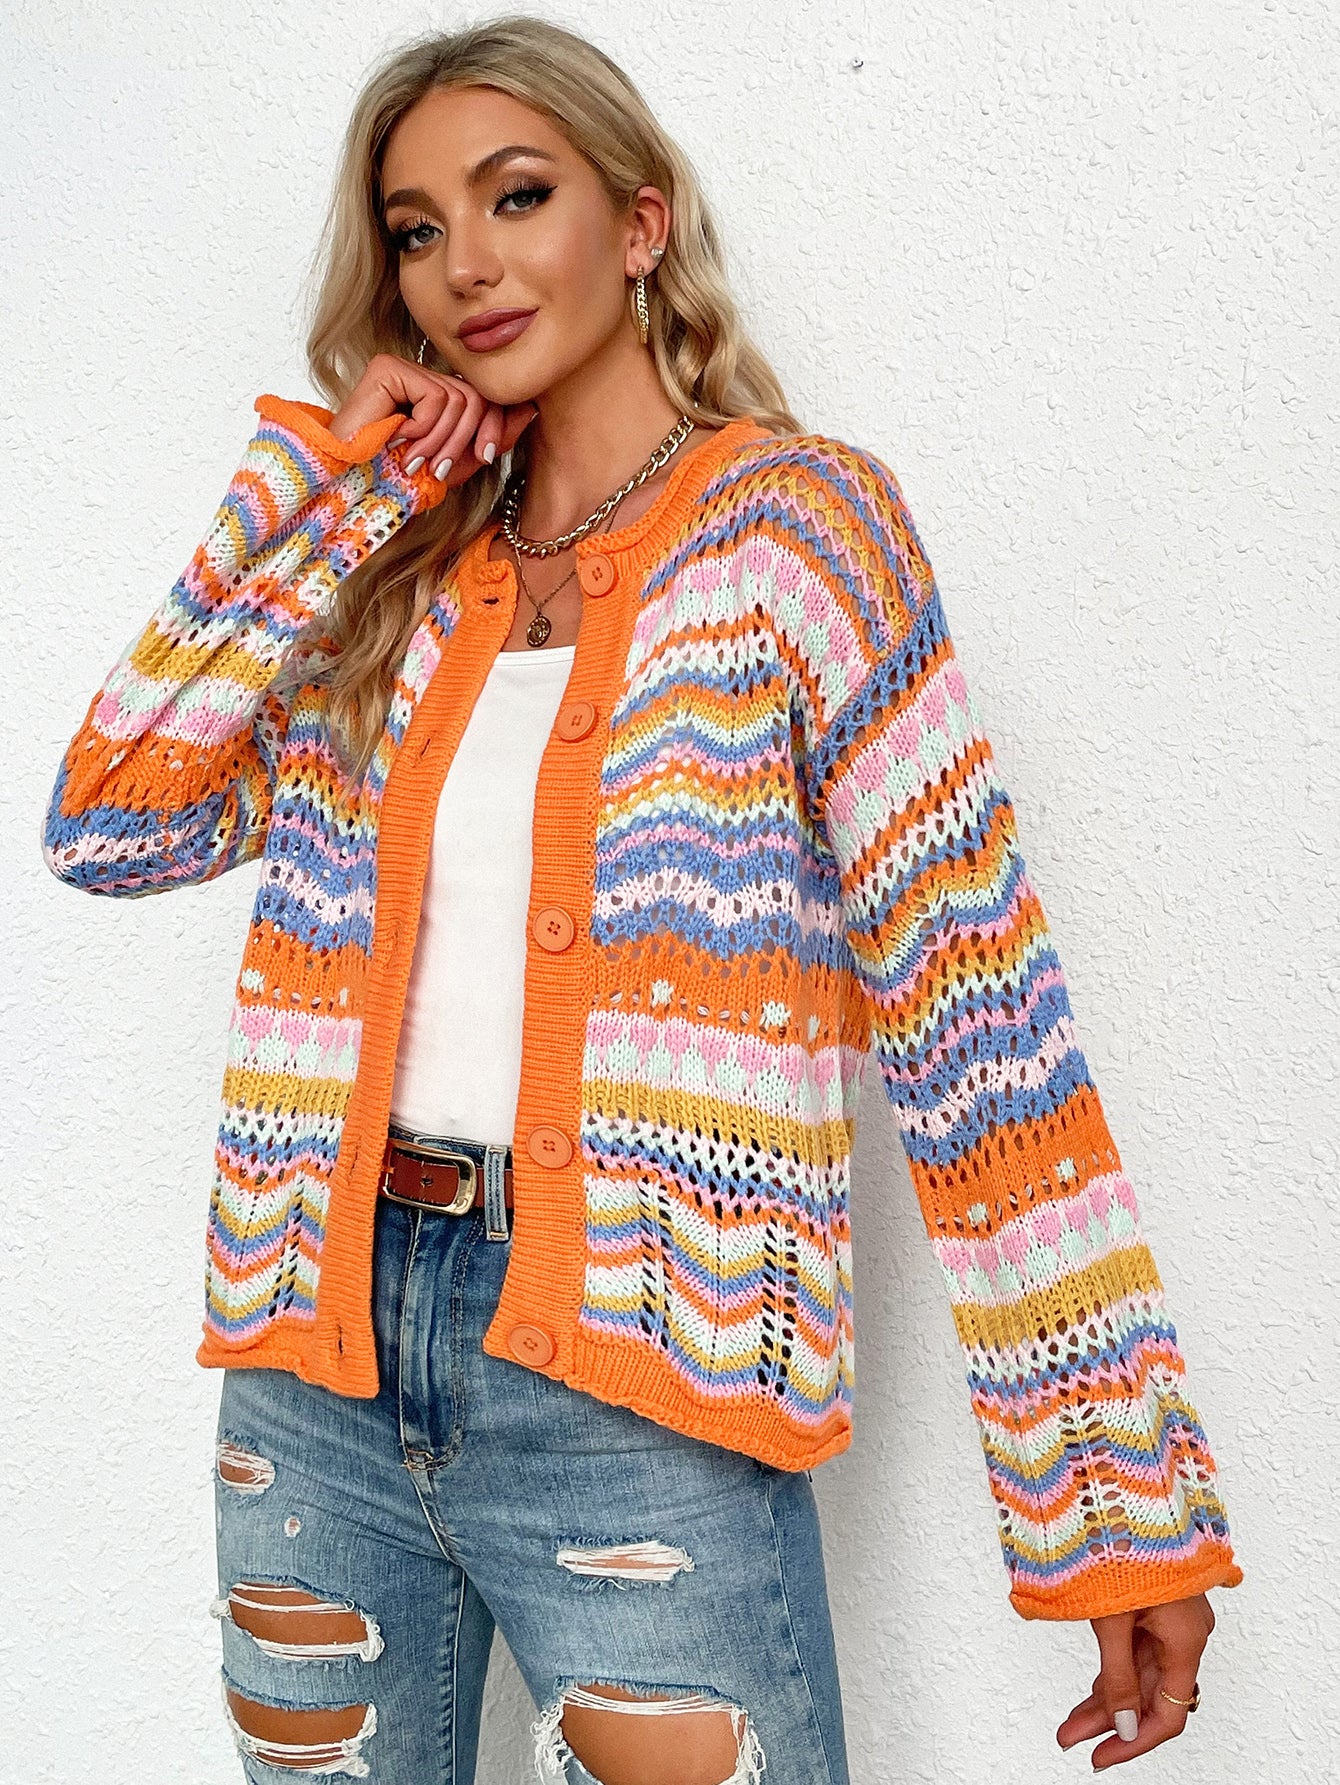 Elevate your style with our Chevron Stripes Cardigans. Discover chic and cozy fashion in our collection of women's striped cardigans designed for a versatile and comfortable look.